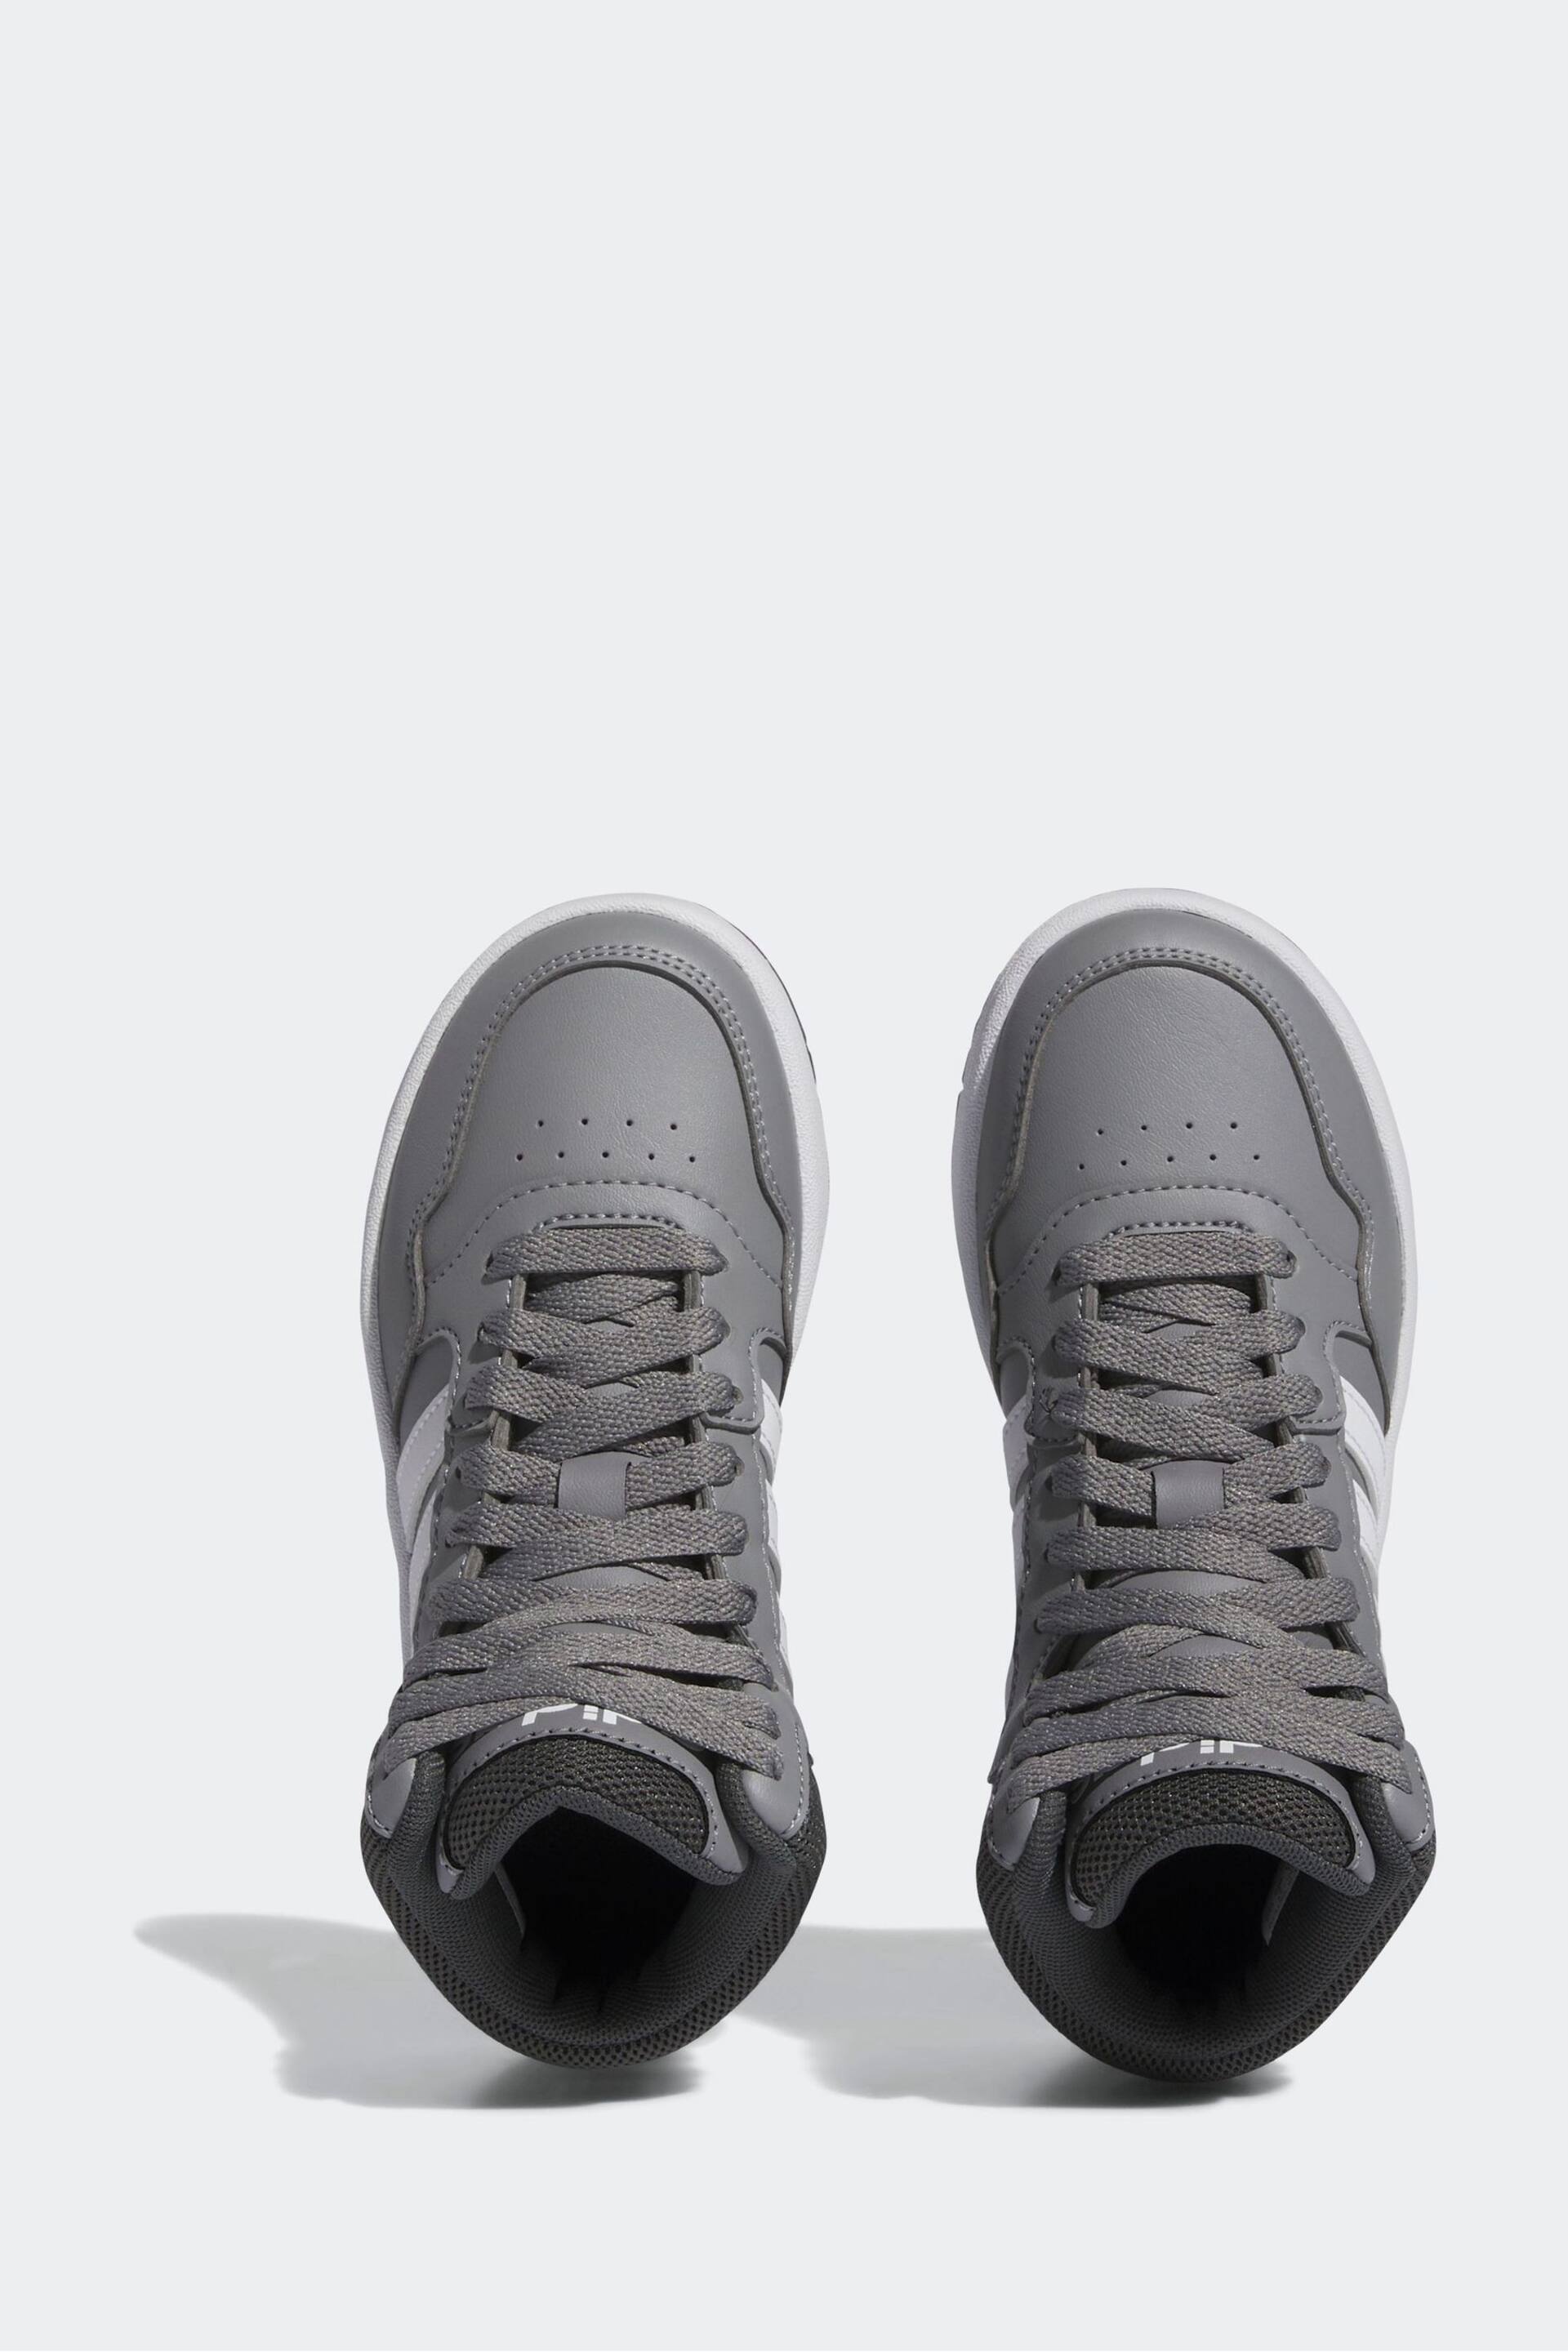 adidas Grey White Hoops Mid Shoes - Image 6 of 9